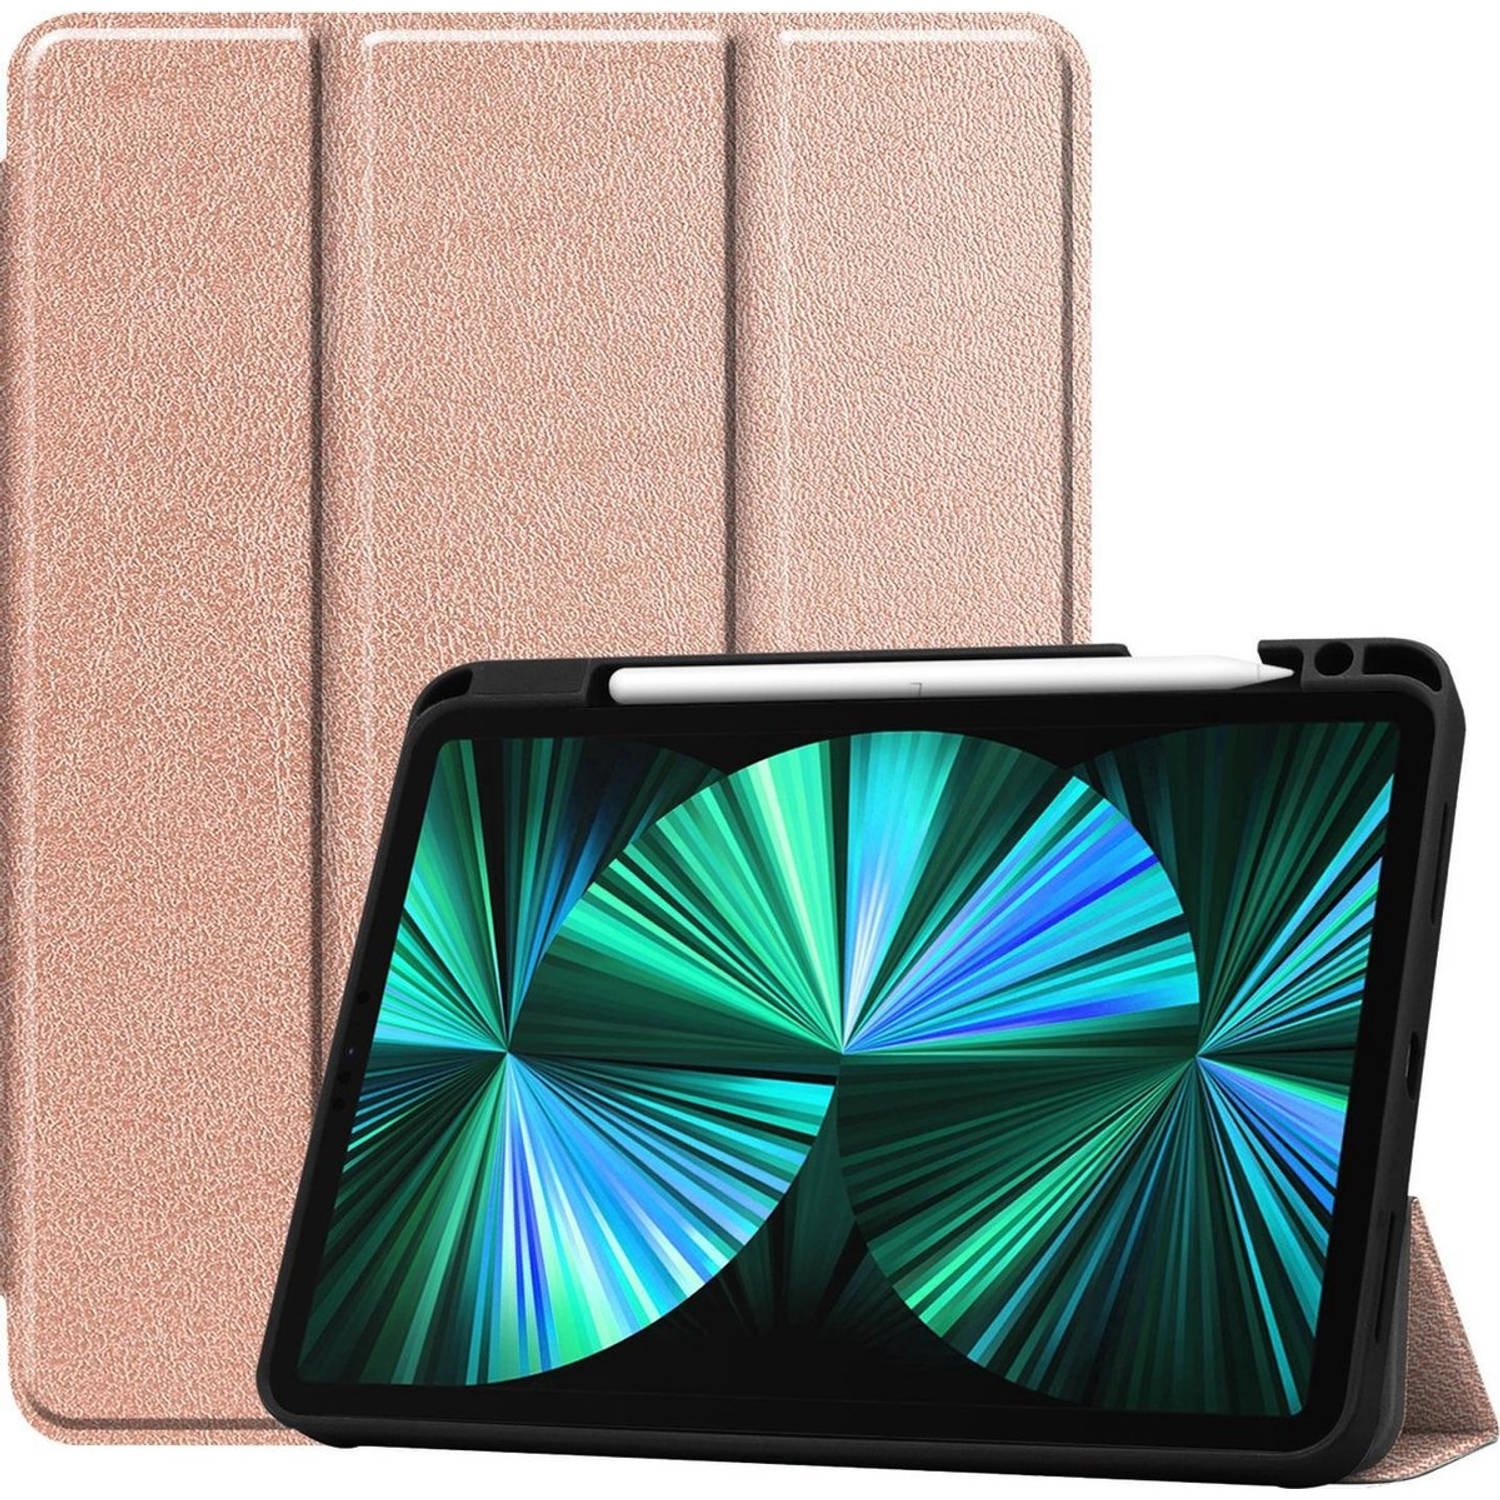 Basey iPad Pro 2021 12.9 inch Hoes Case Hoesje rose Goud Uitsparing Apple Pencil